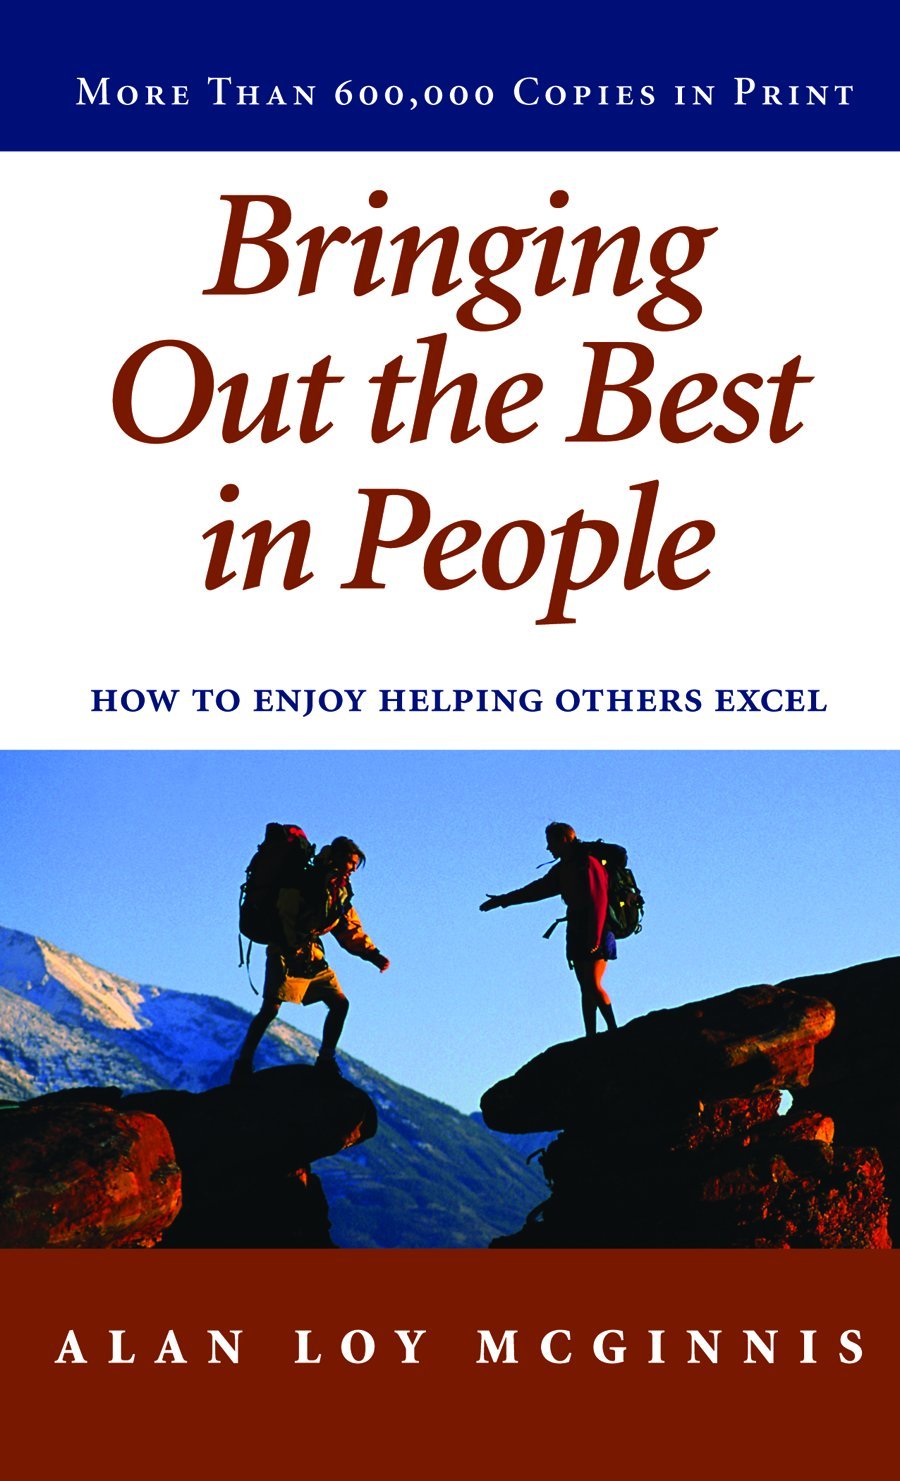 Bringing Out the Best in People: How to Enjoy Helping Others Excel